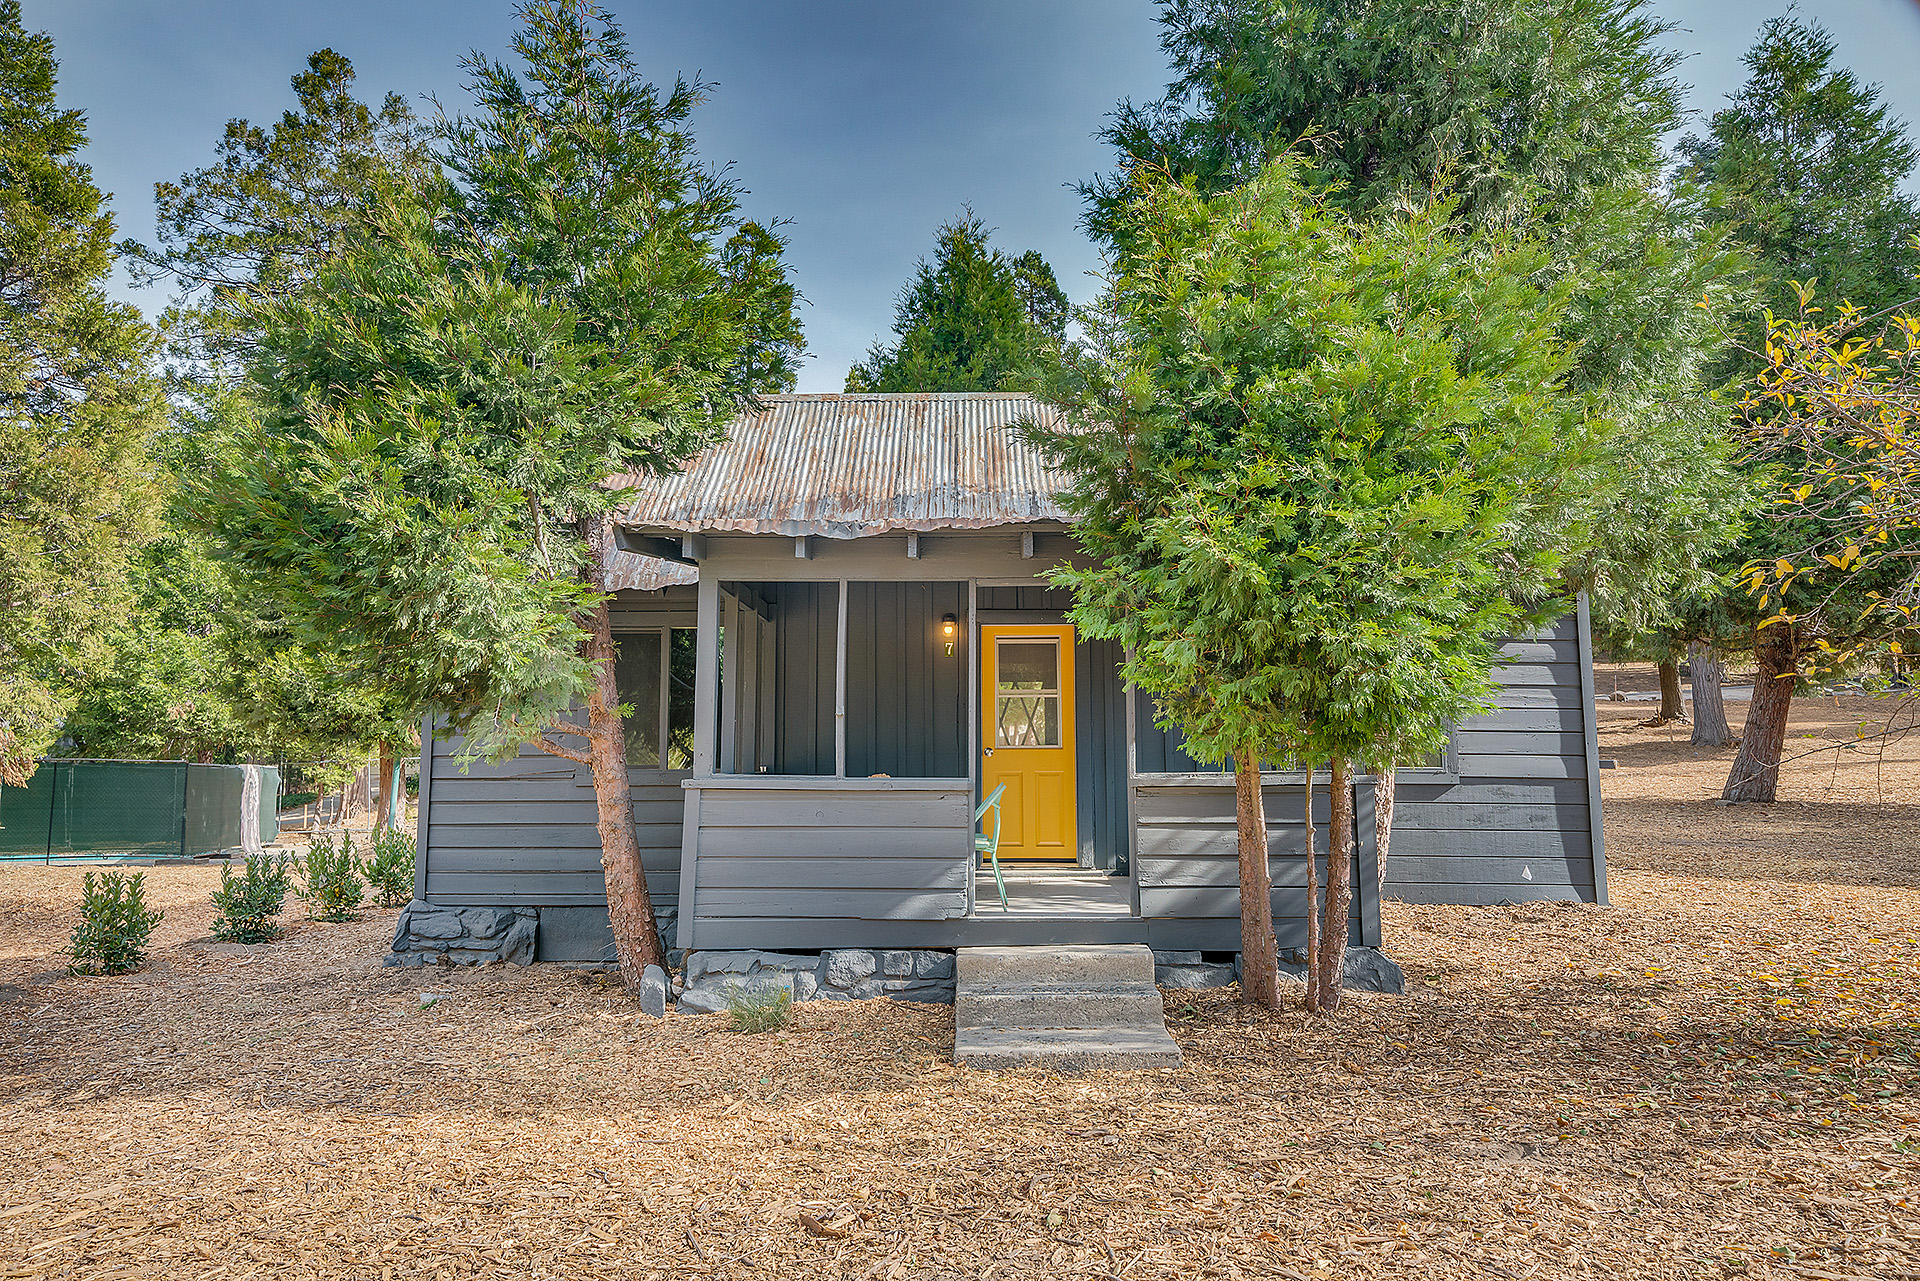 Exterior view of The Perch vacation rental cabin at Twin Peaks, California